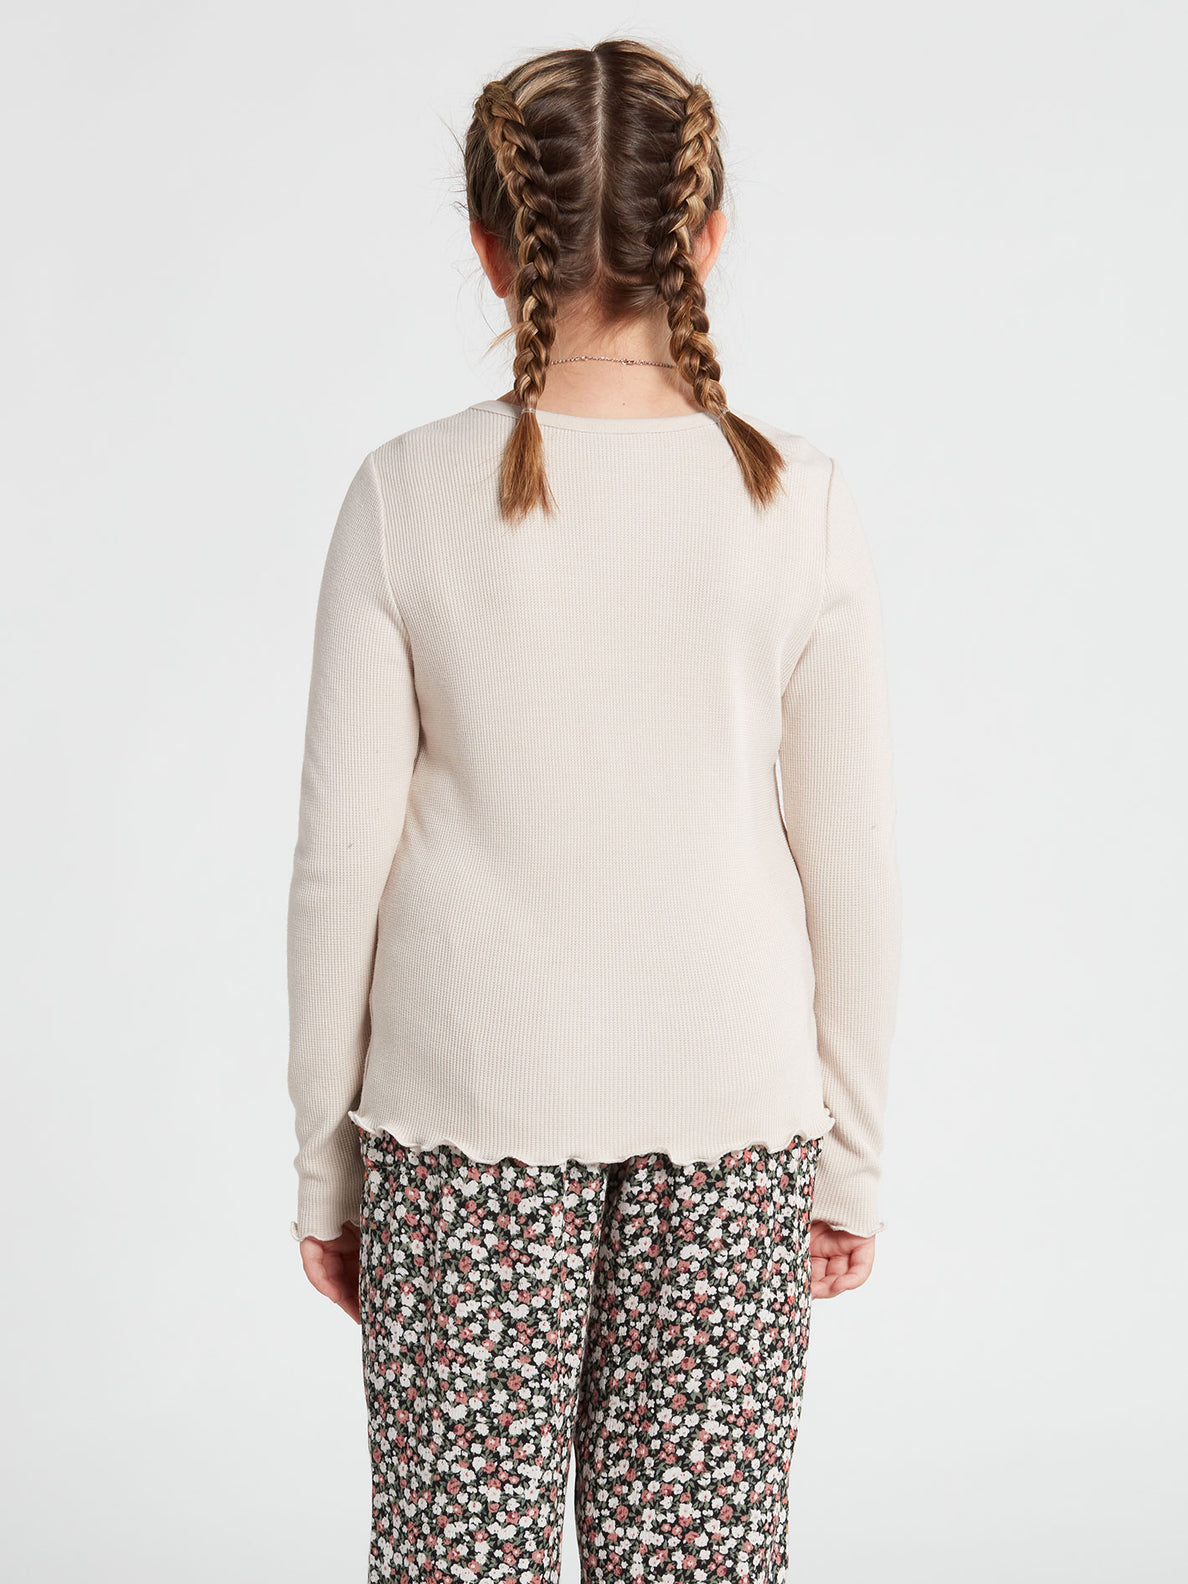 Girls Lived In Lounge Thermal Long Sleeve Top - Bone